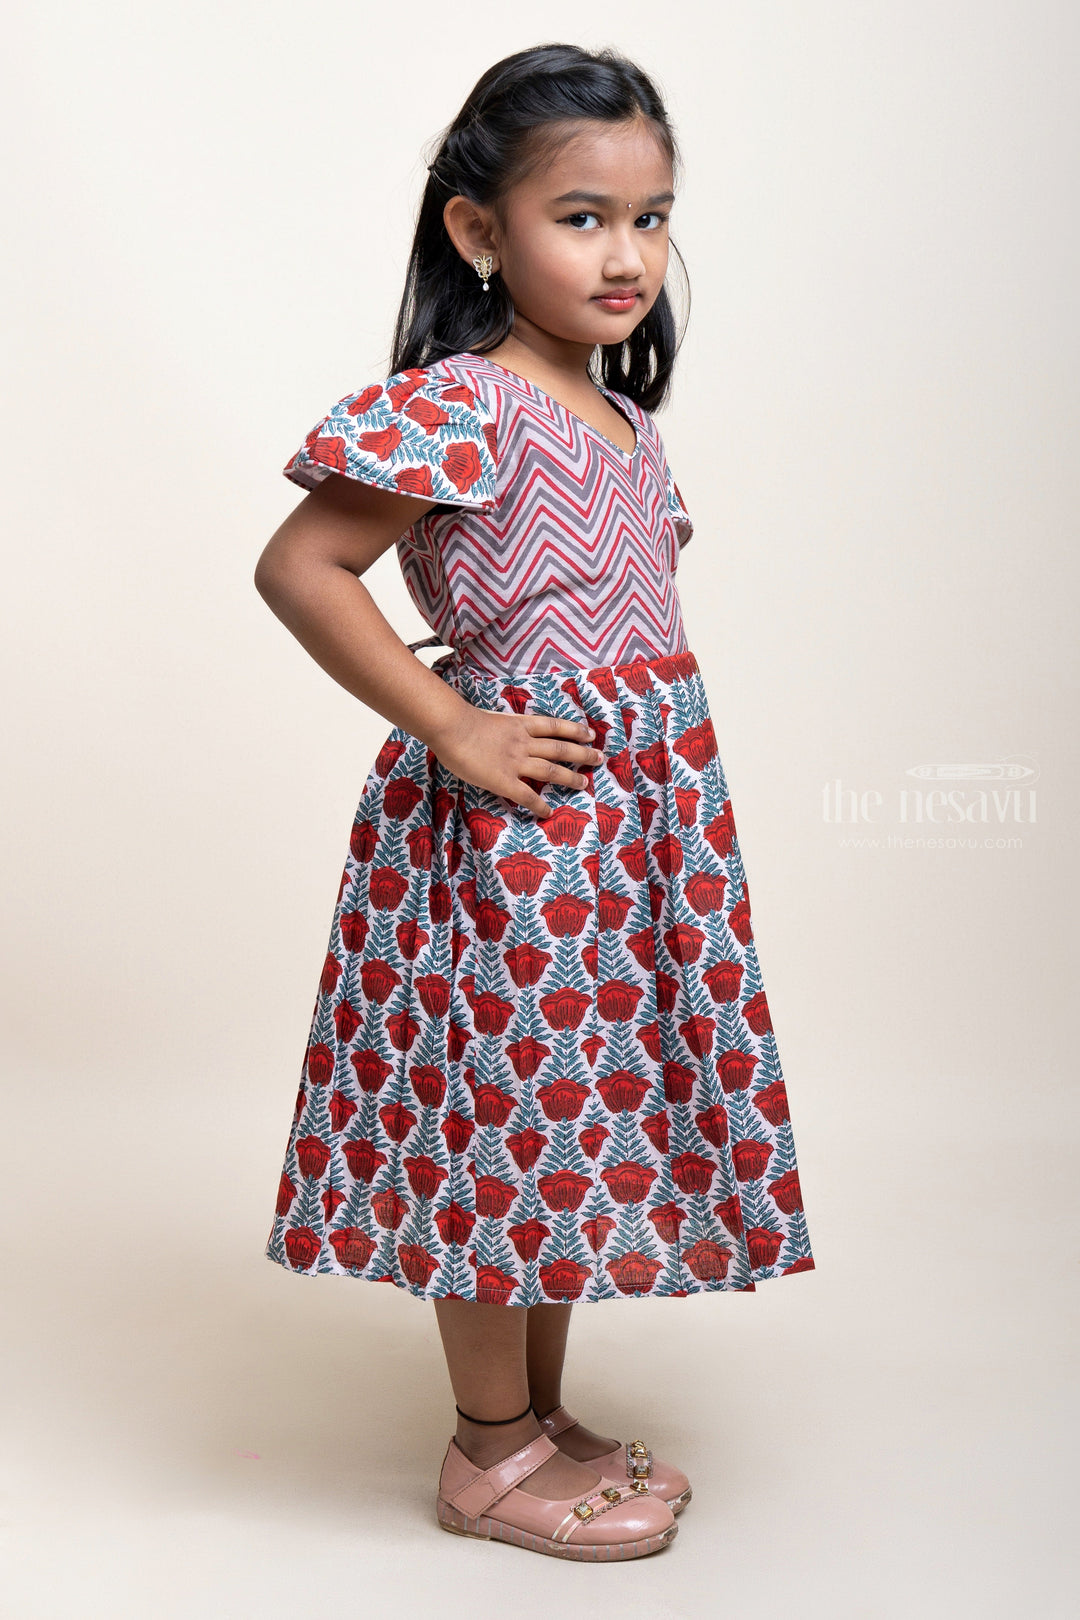 The Nesavu Girls Cotton Frock Cotton Frock For Girls With Ikkat And Mughal Floral Prints Nesavu Daily Wear Frocks| Cotton Frock Design| The Nesavu